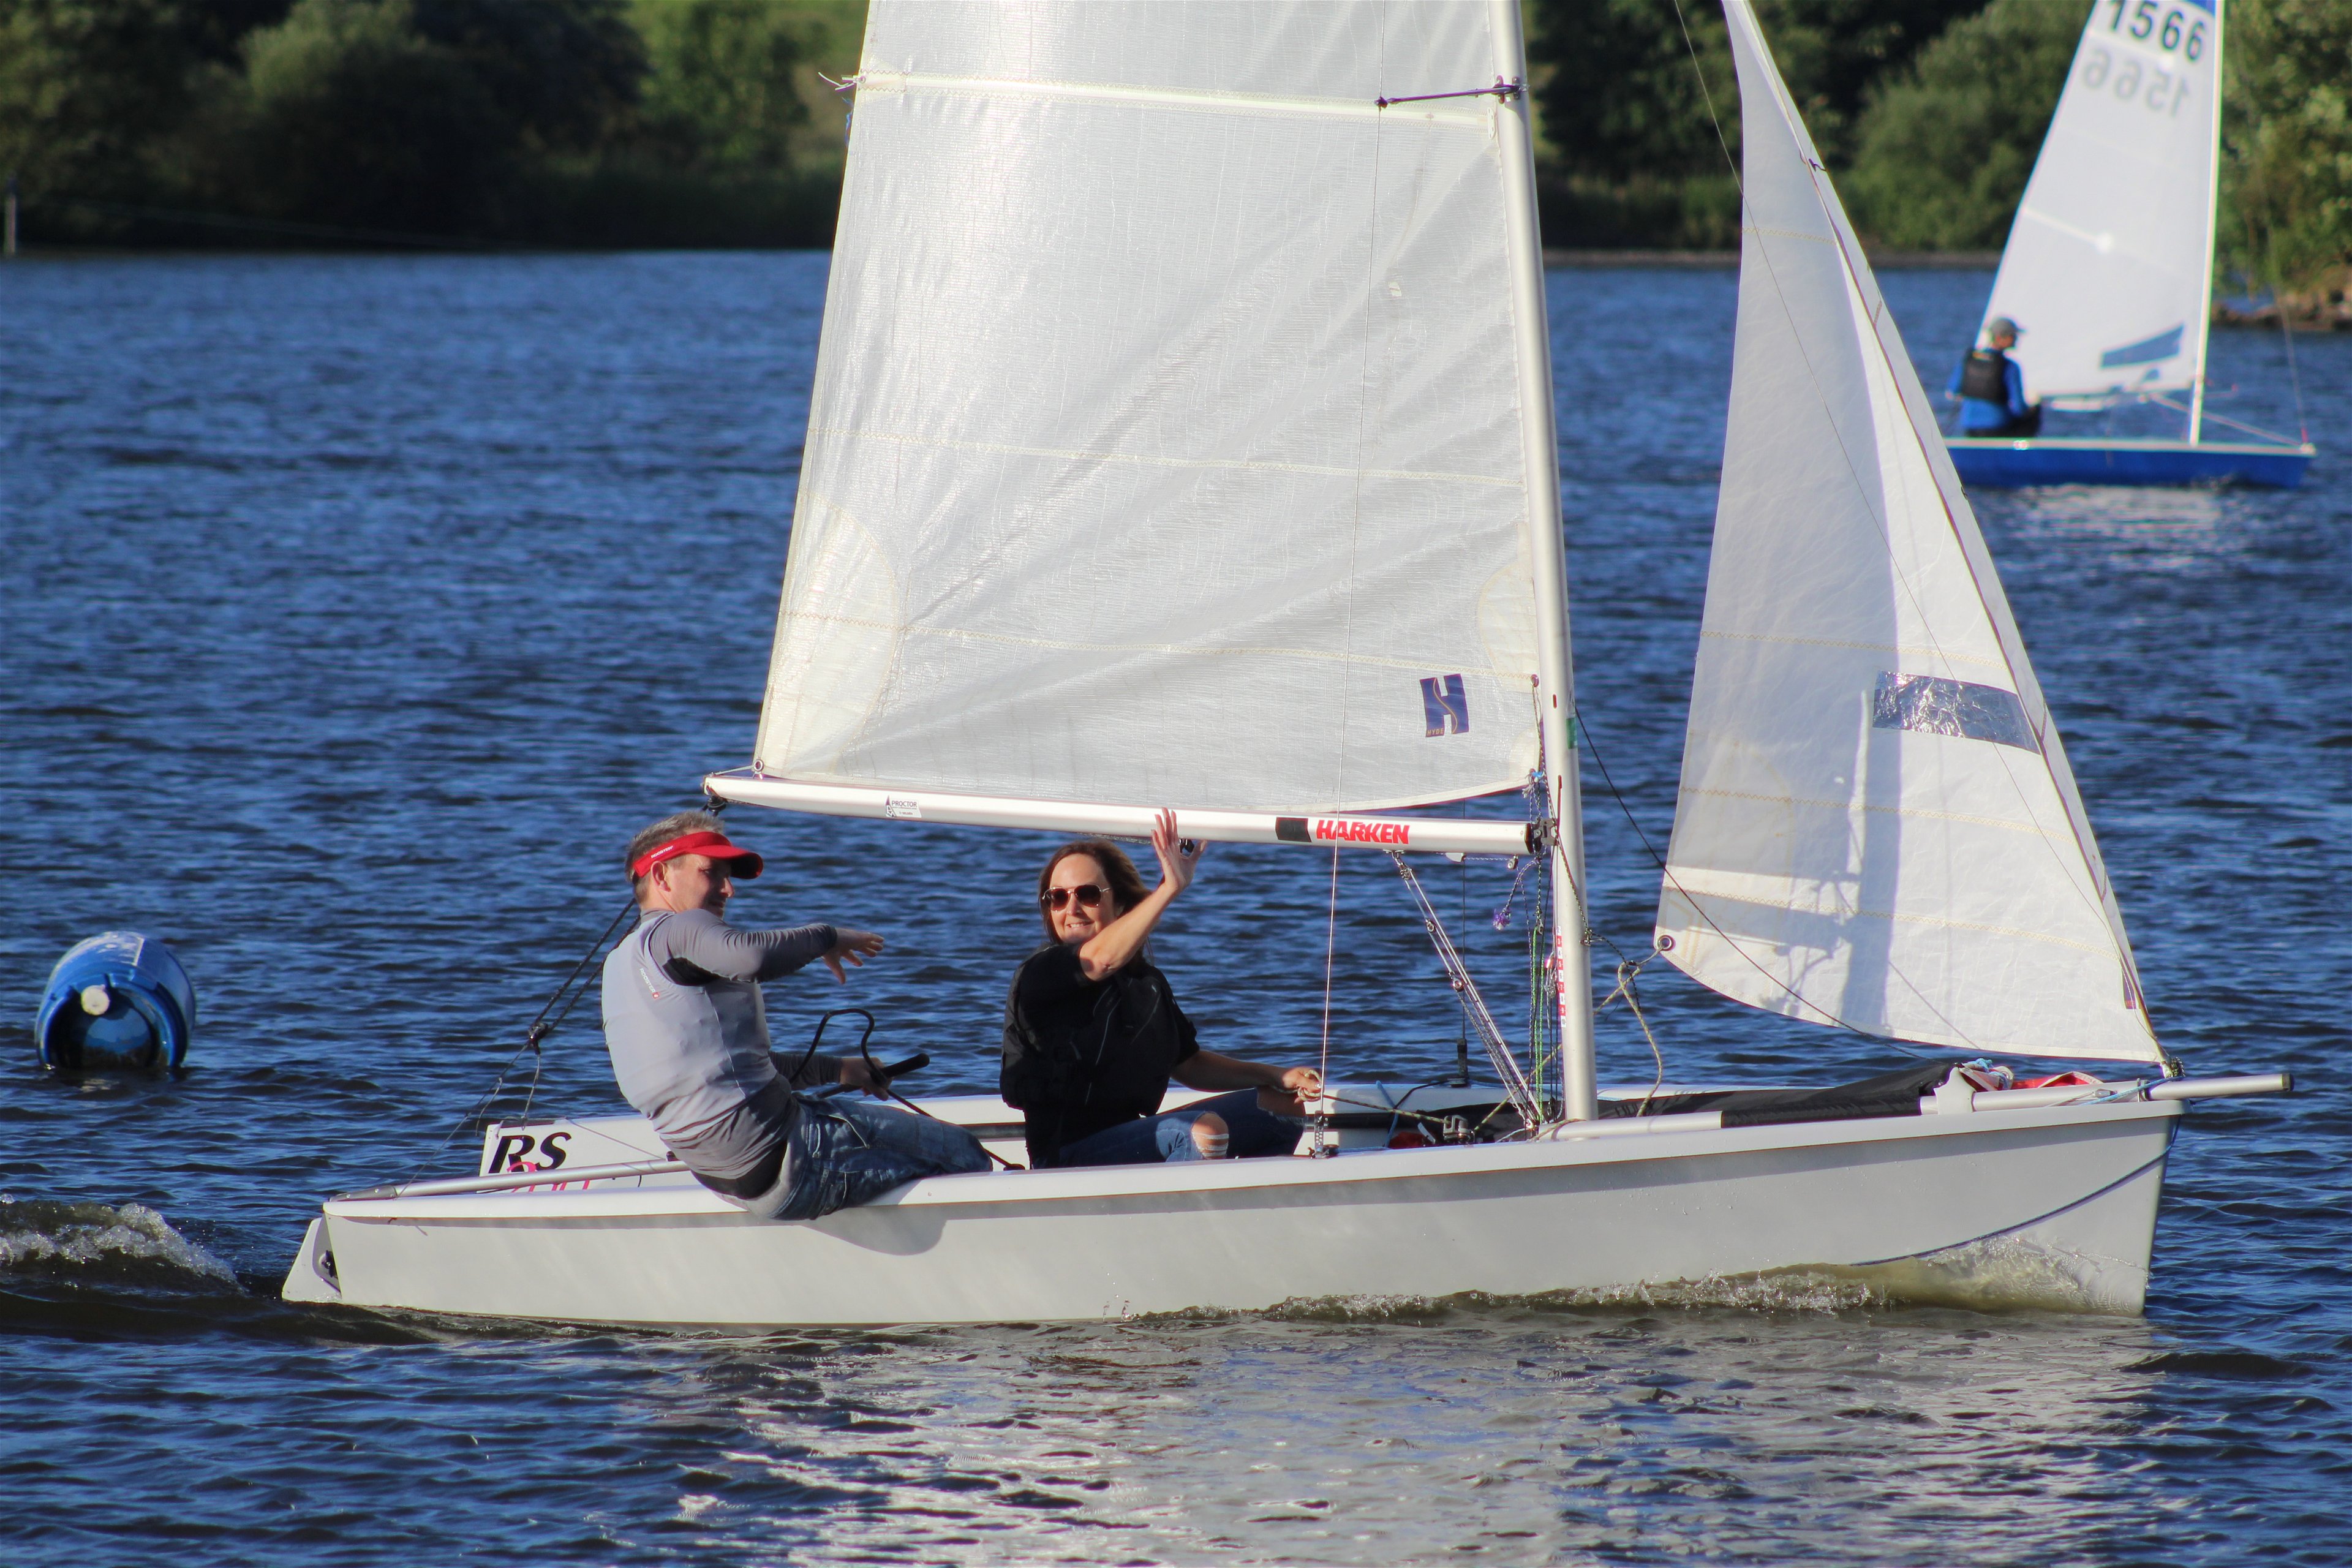 Come and Try Sailing at Yeadon Sailing Club